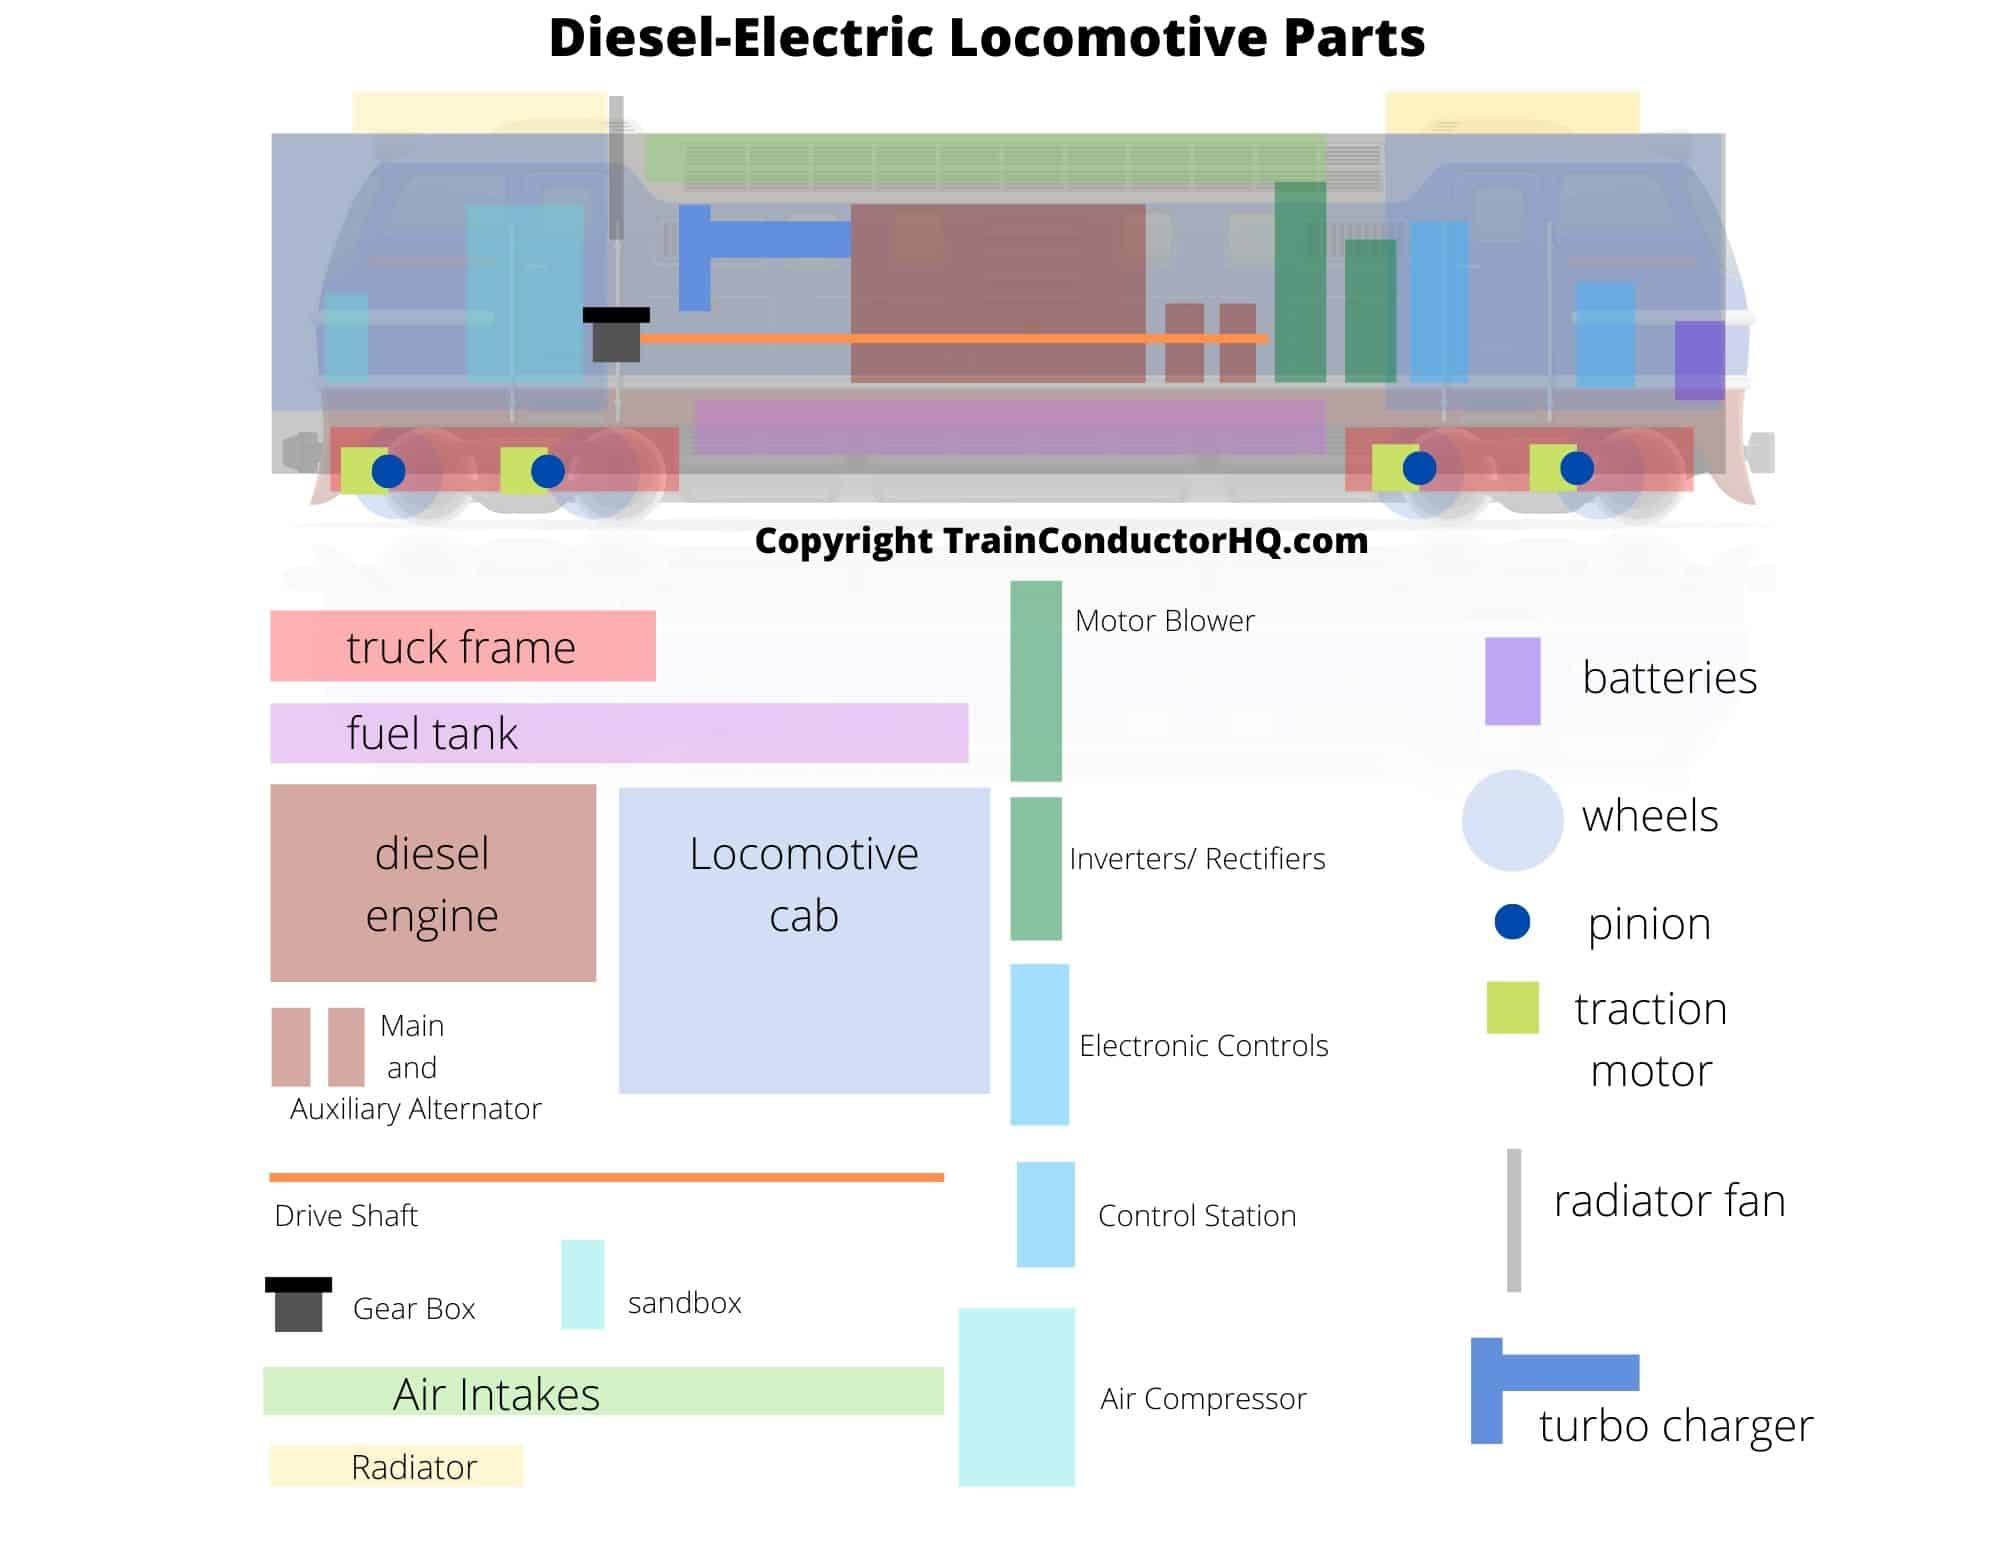 parts of a diesel-electric locomotive